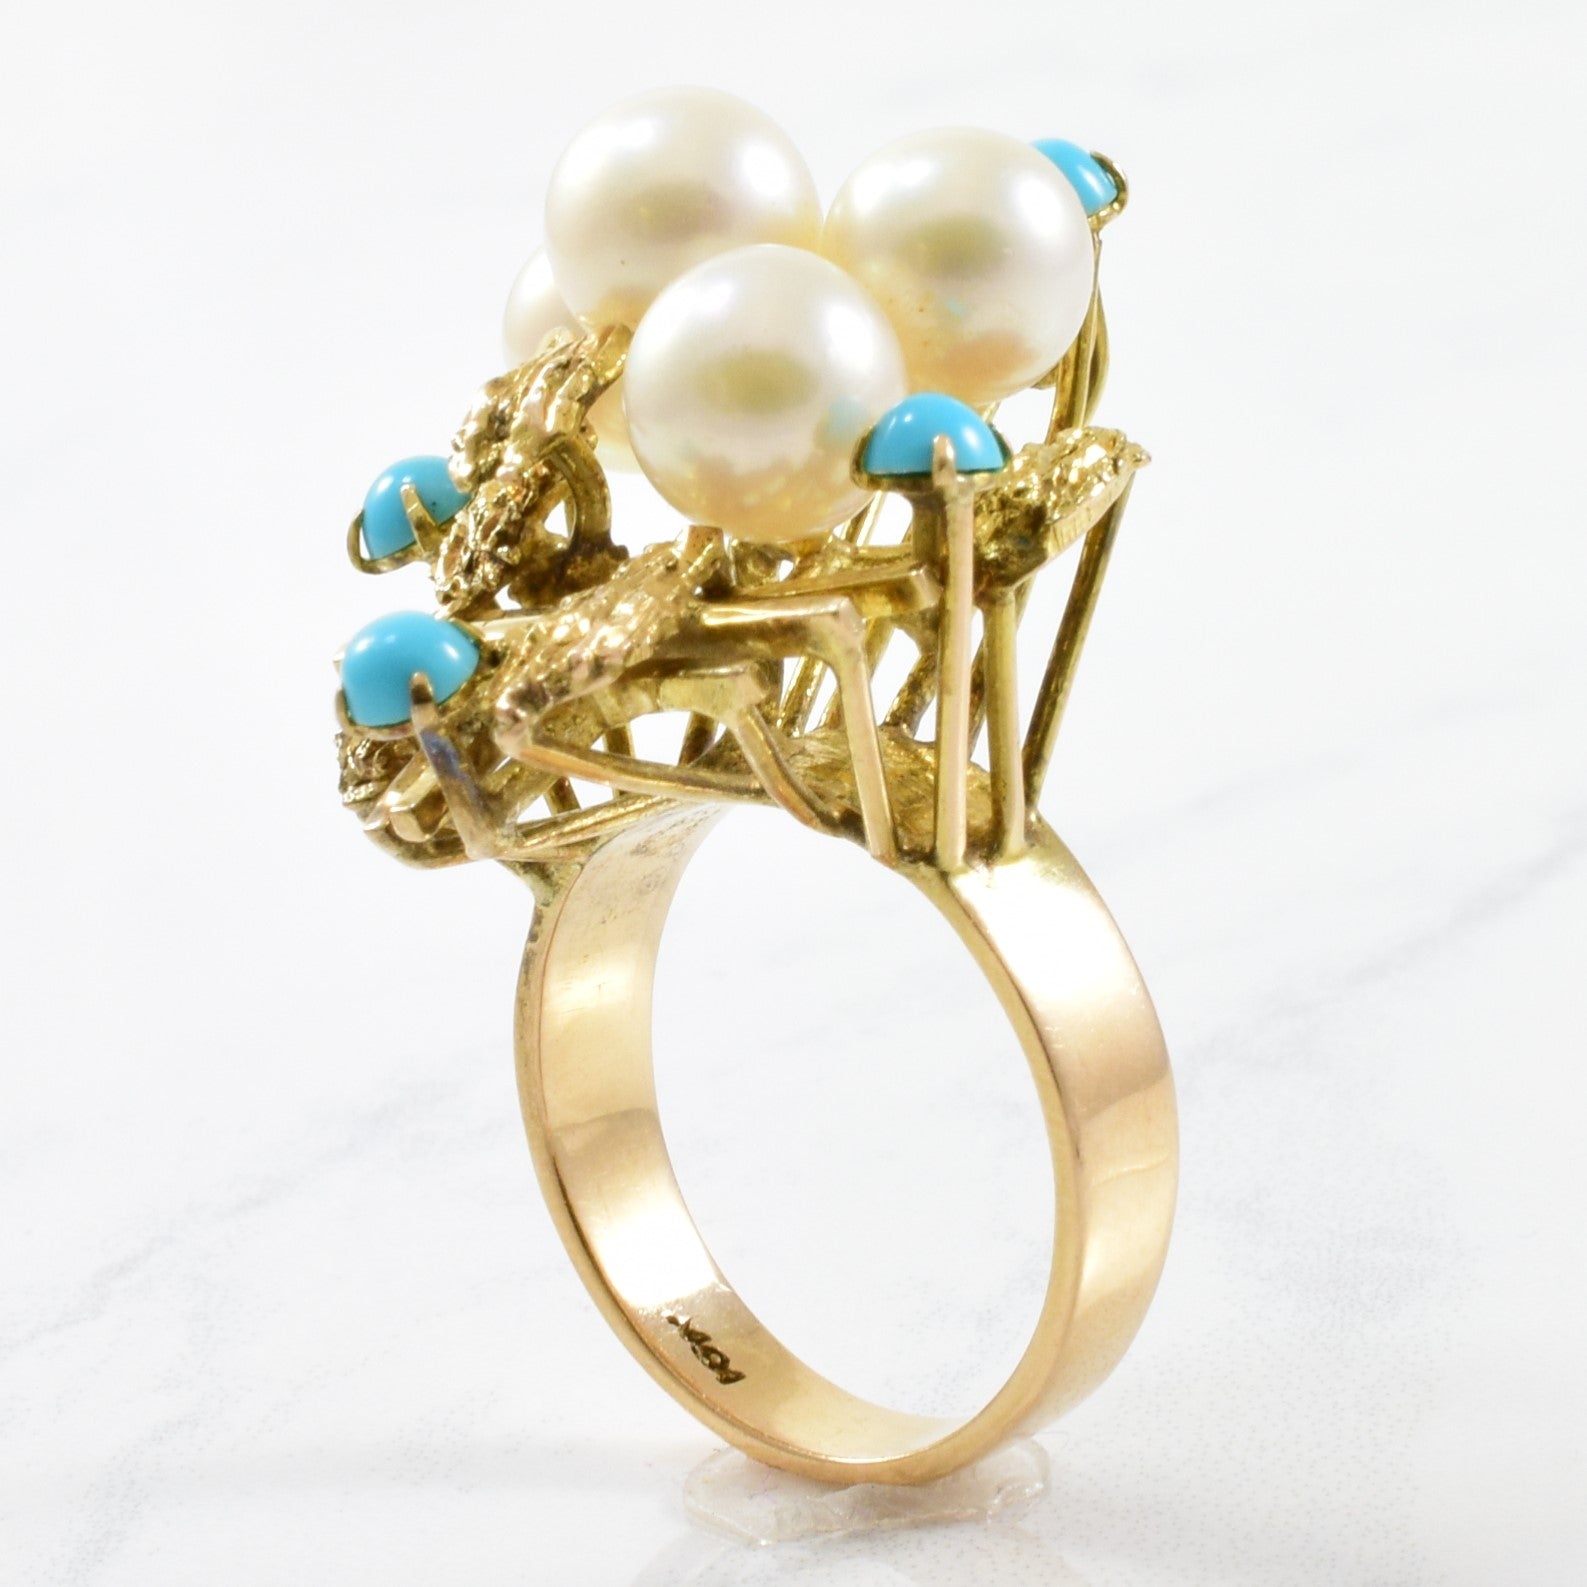 High Set Pearl & Turquoise Ring | SZ 7.25 |